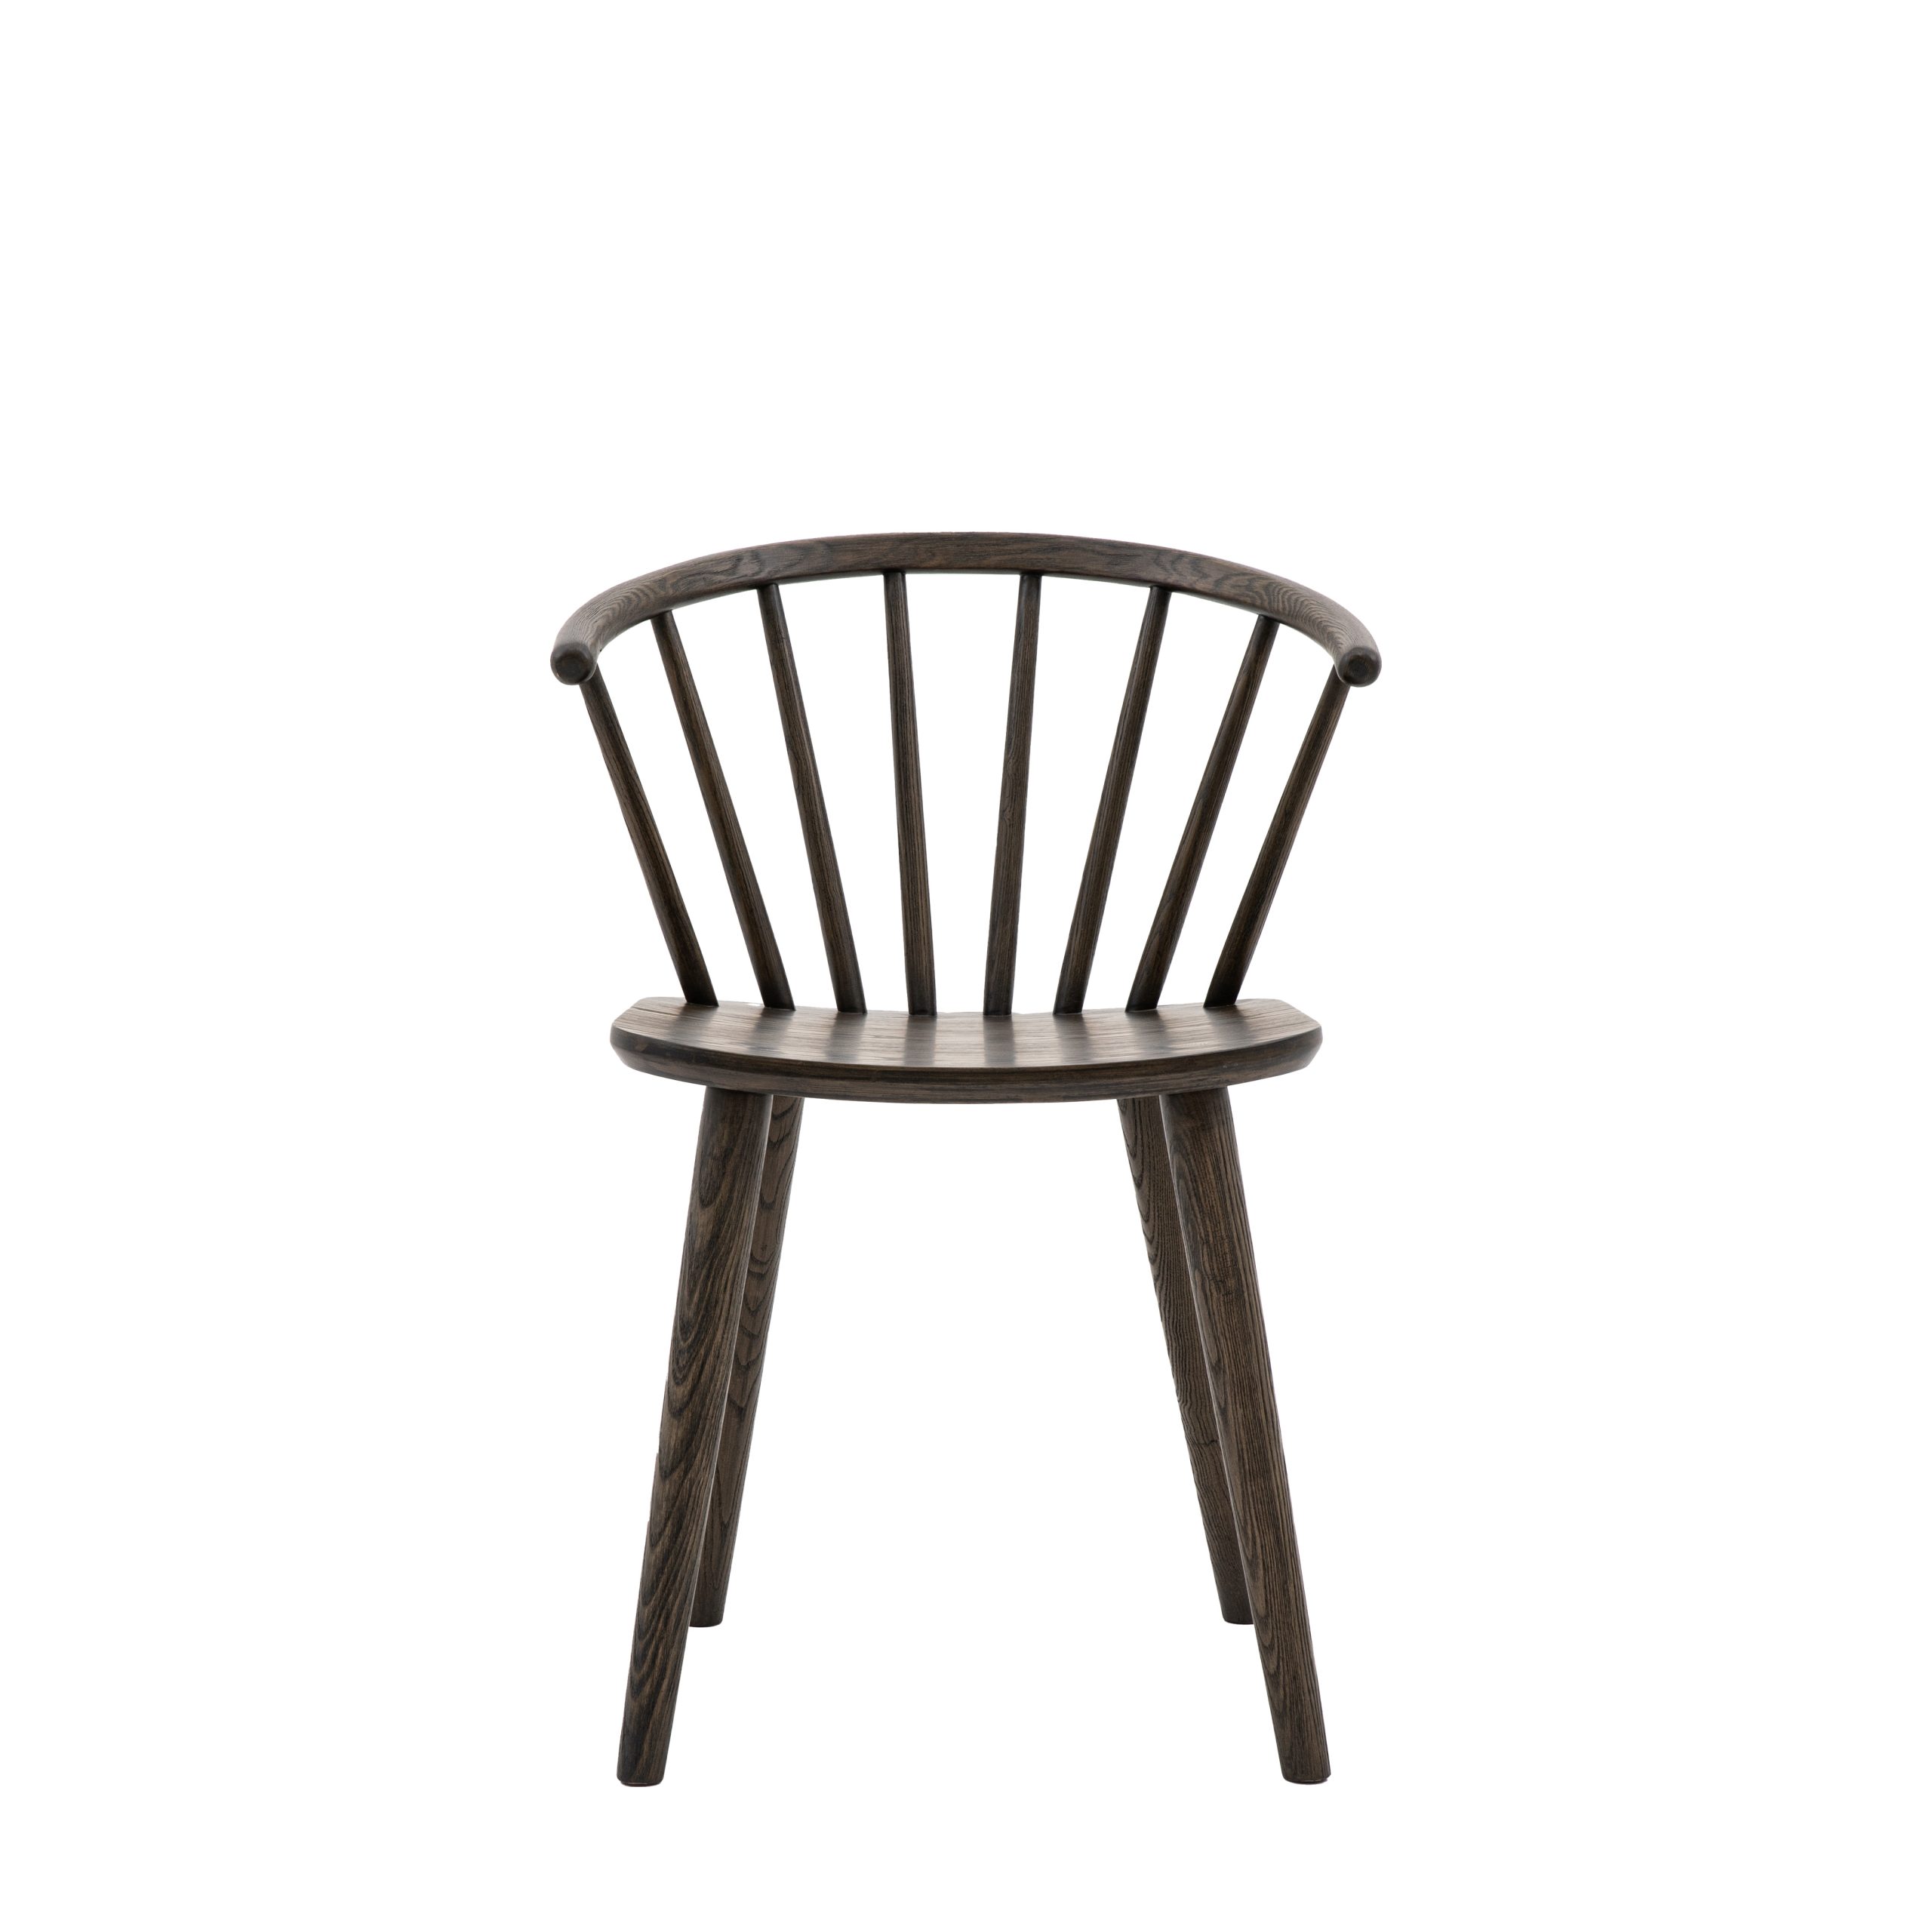 Gallery Direct Craft Dining Chair Mocha (Set of 2)